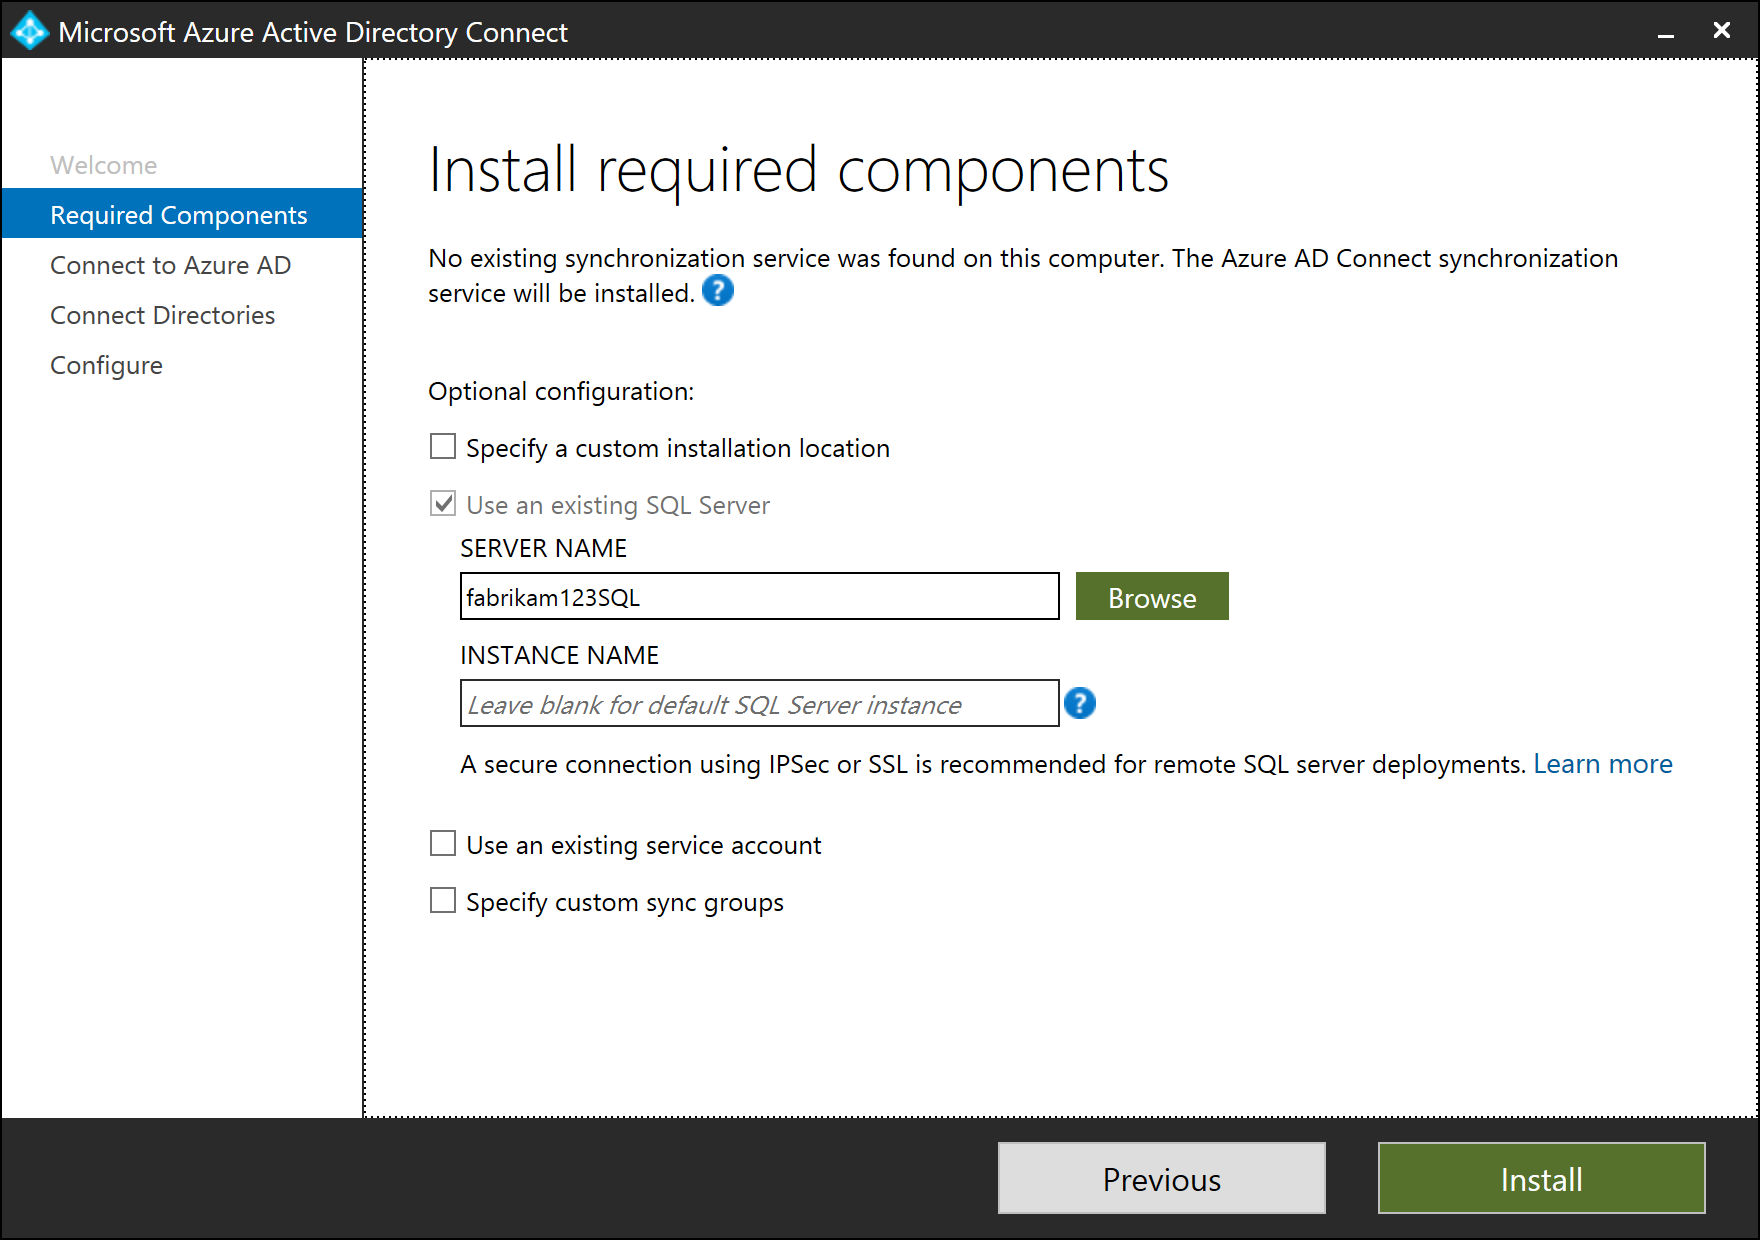 Screenshot that shows the "Install required components" page.